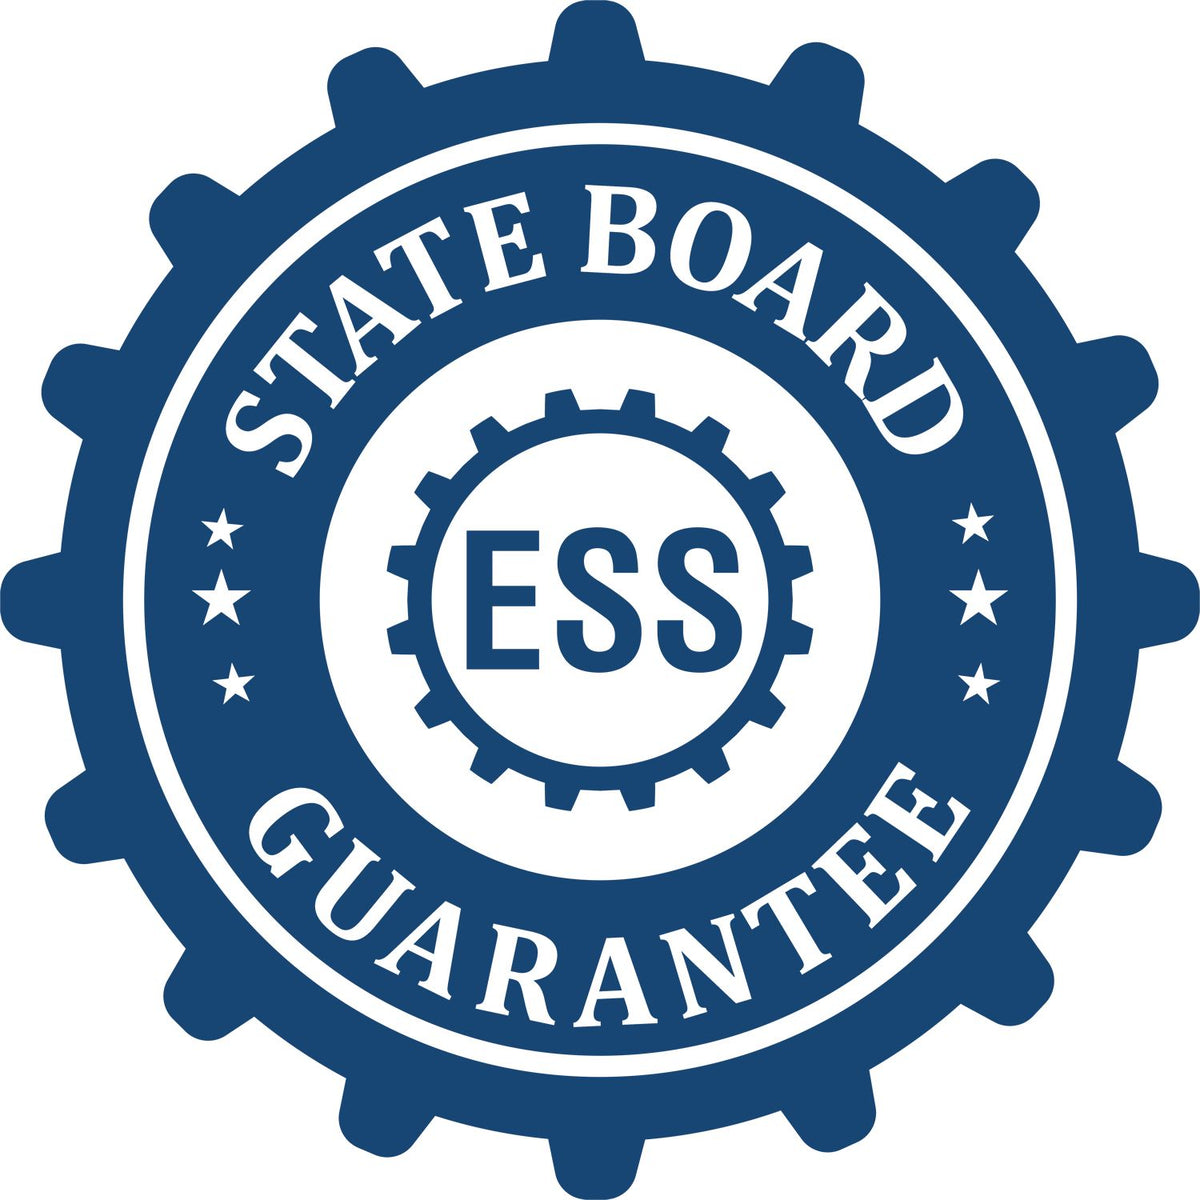 An emblem in a gear shape illustrating a state board guarantee for the Guam Geologist Desk Seal